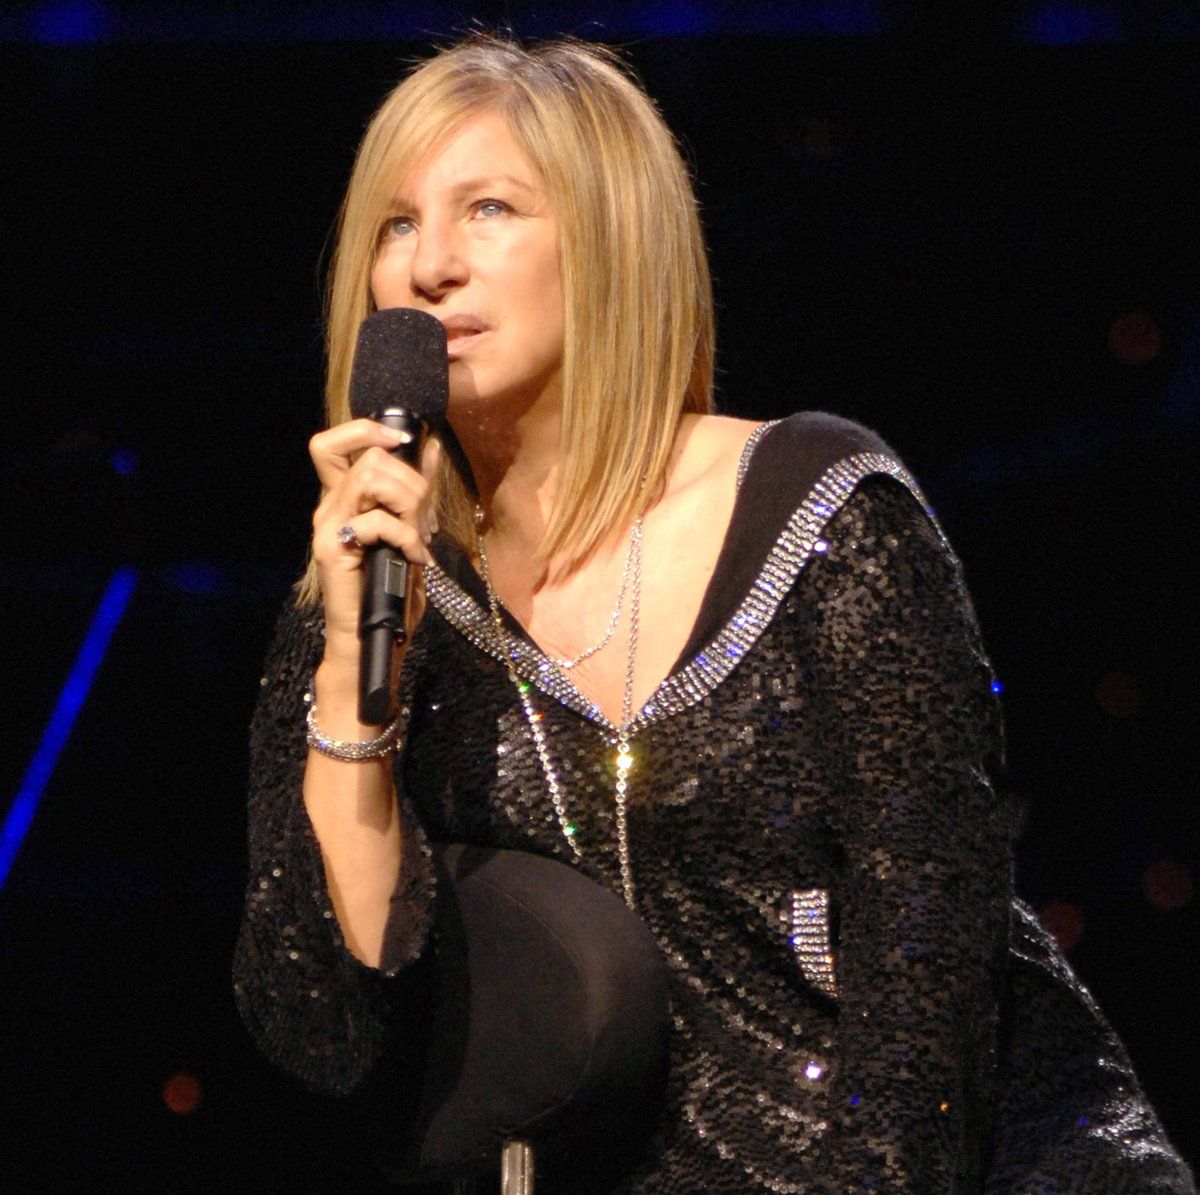 Streisand wearing first act sparkly sailor top in Philadelphia.